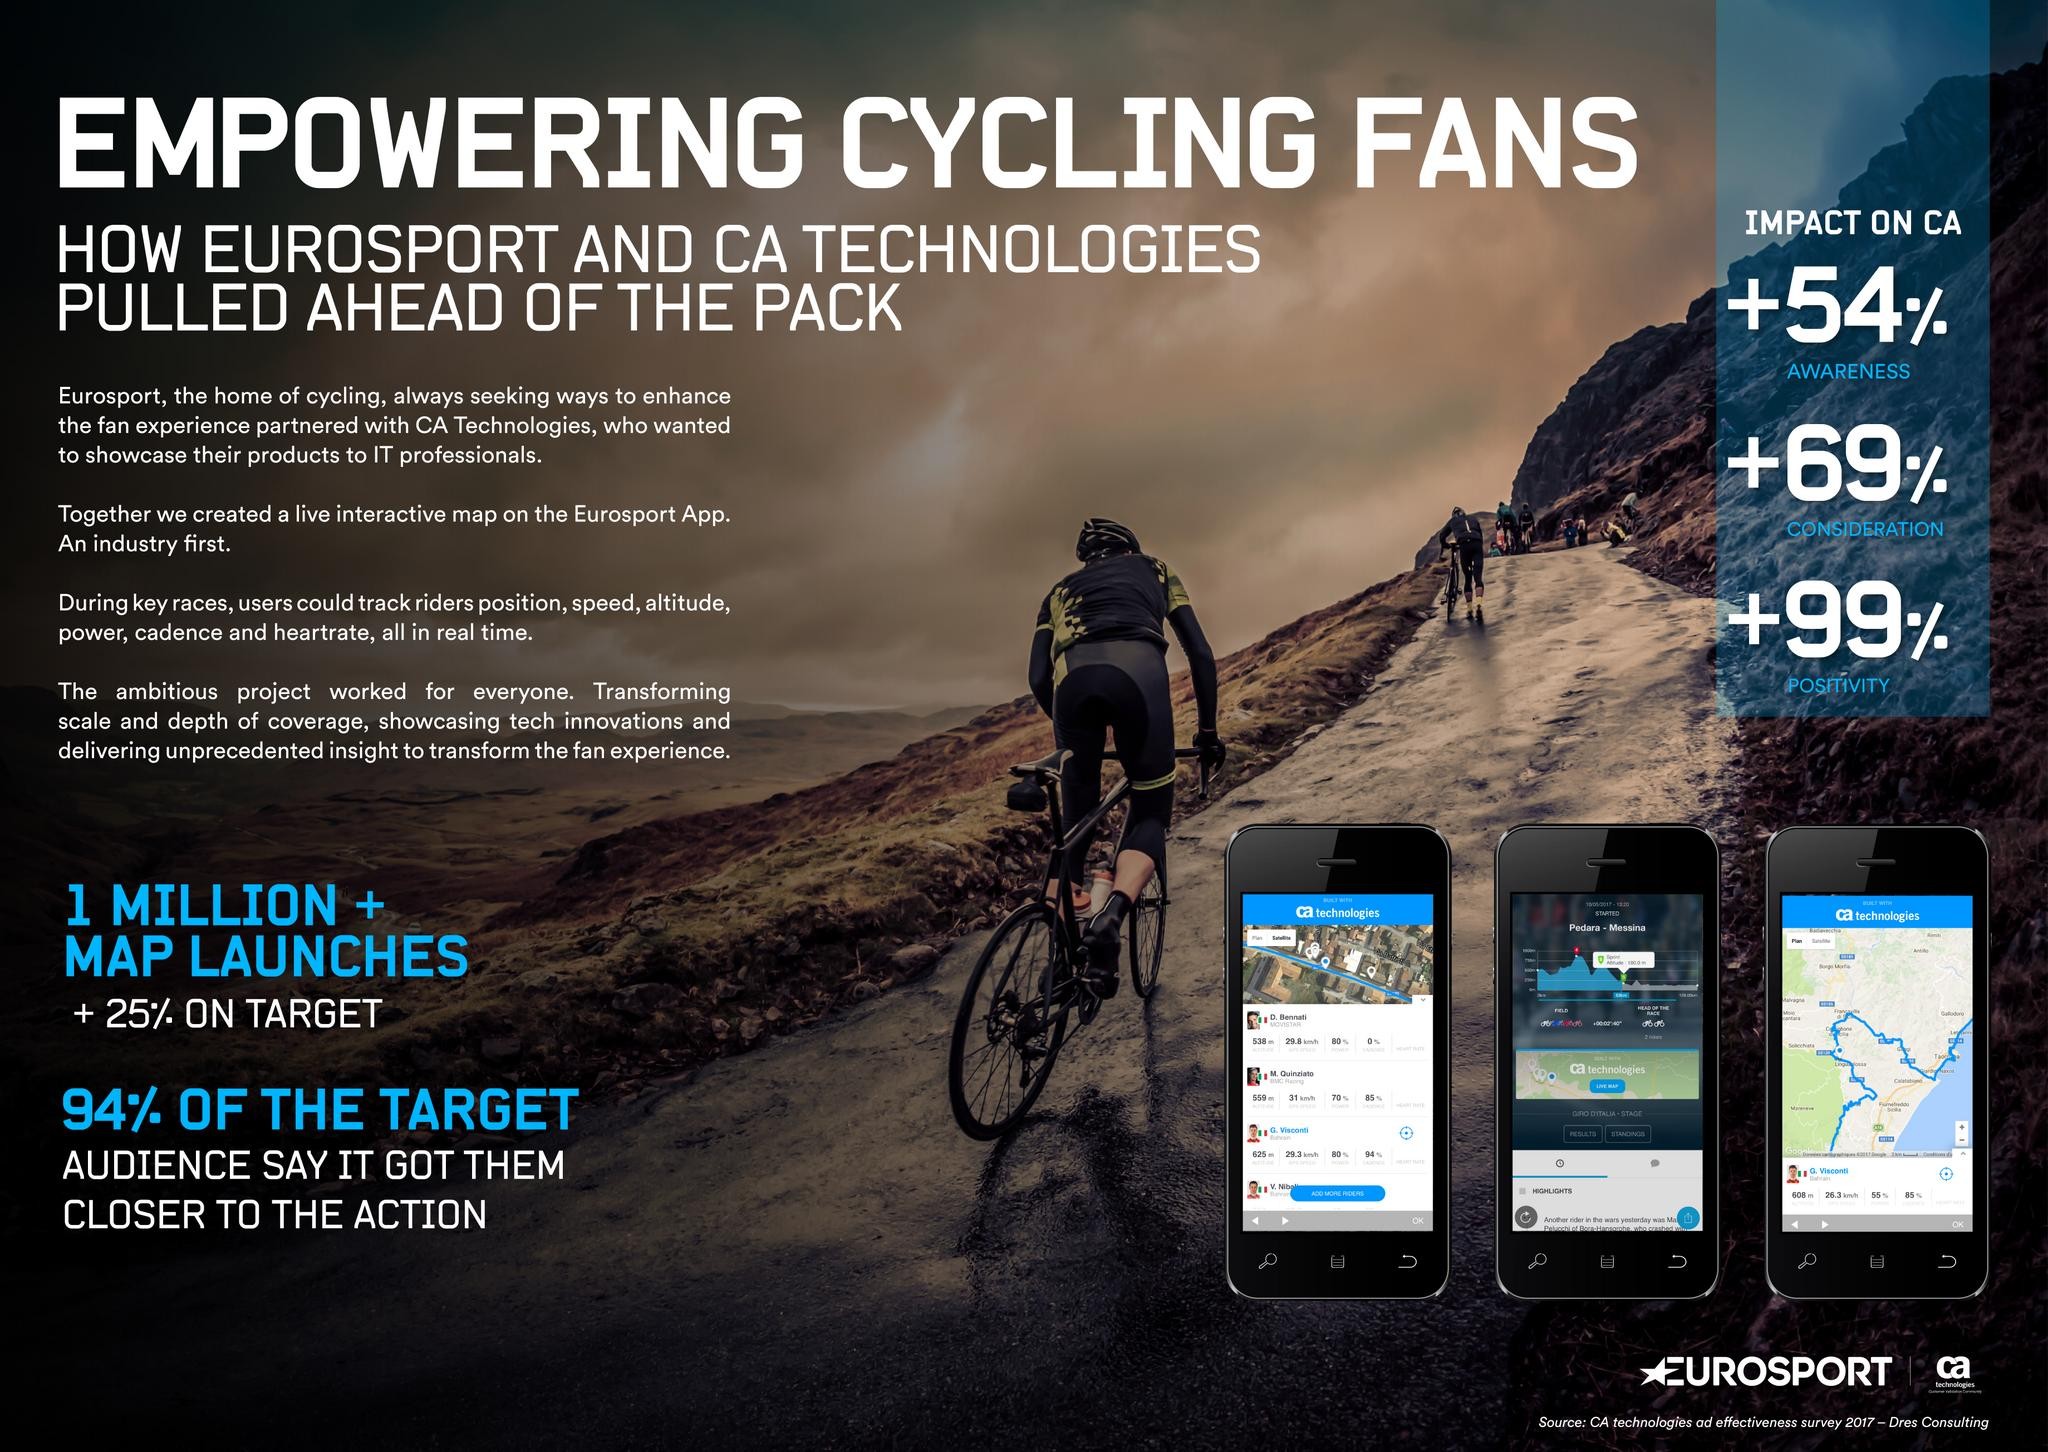 Empowering Cycling Fans: How Eurosport and CA Technologies pulled ahead of the pack